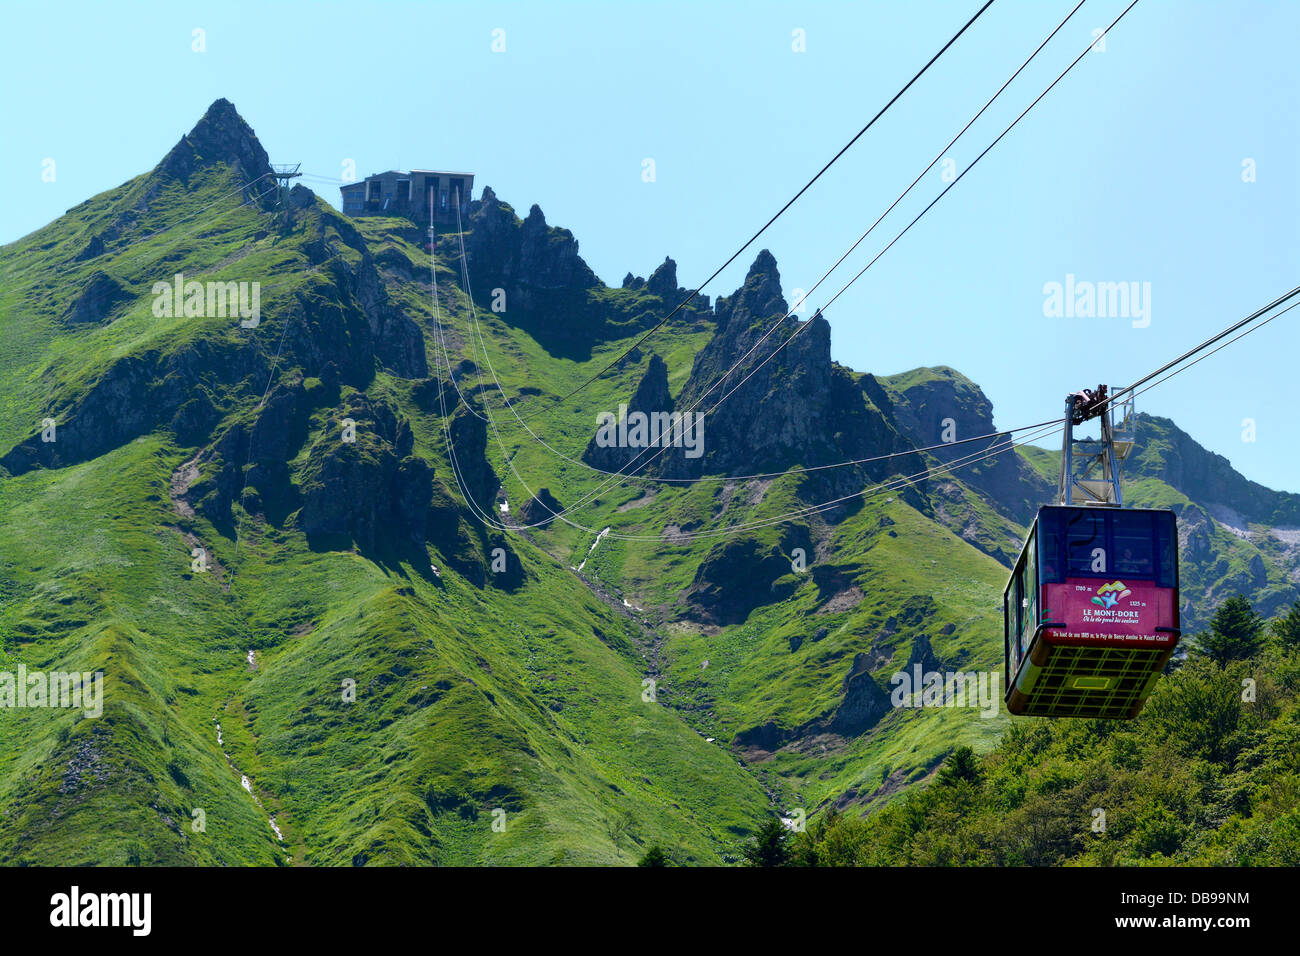 Cable car in the ski resort of Le Mont Dore, going up the Puy du Sancy in the Massif Central range, Auvergne, France, Europe Stock Photo